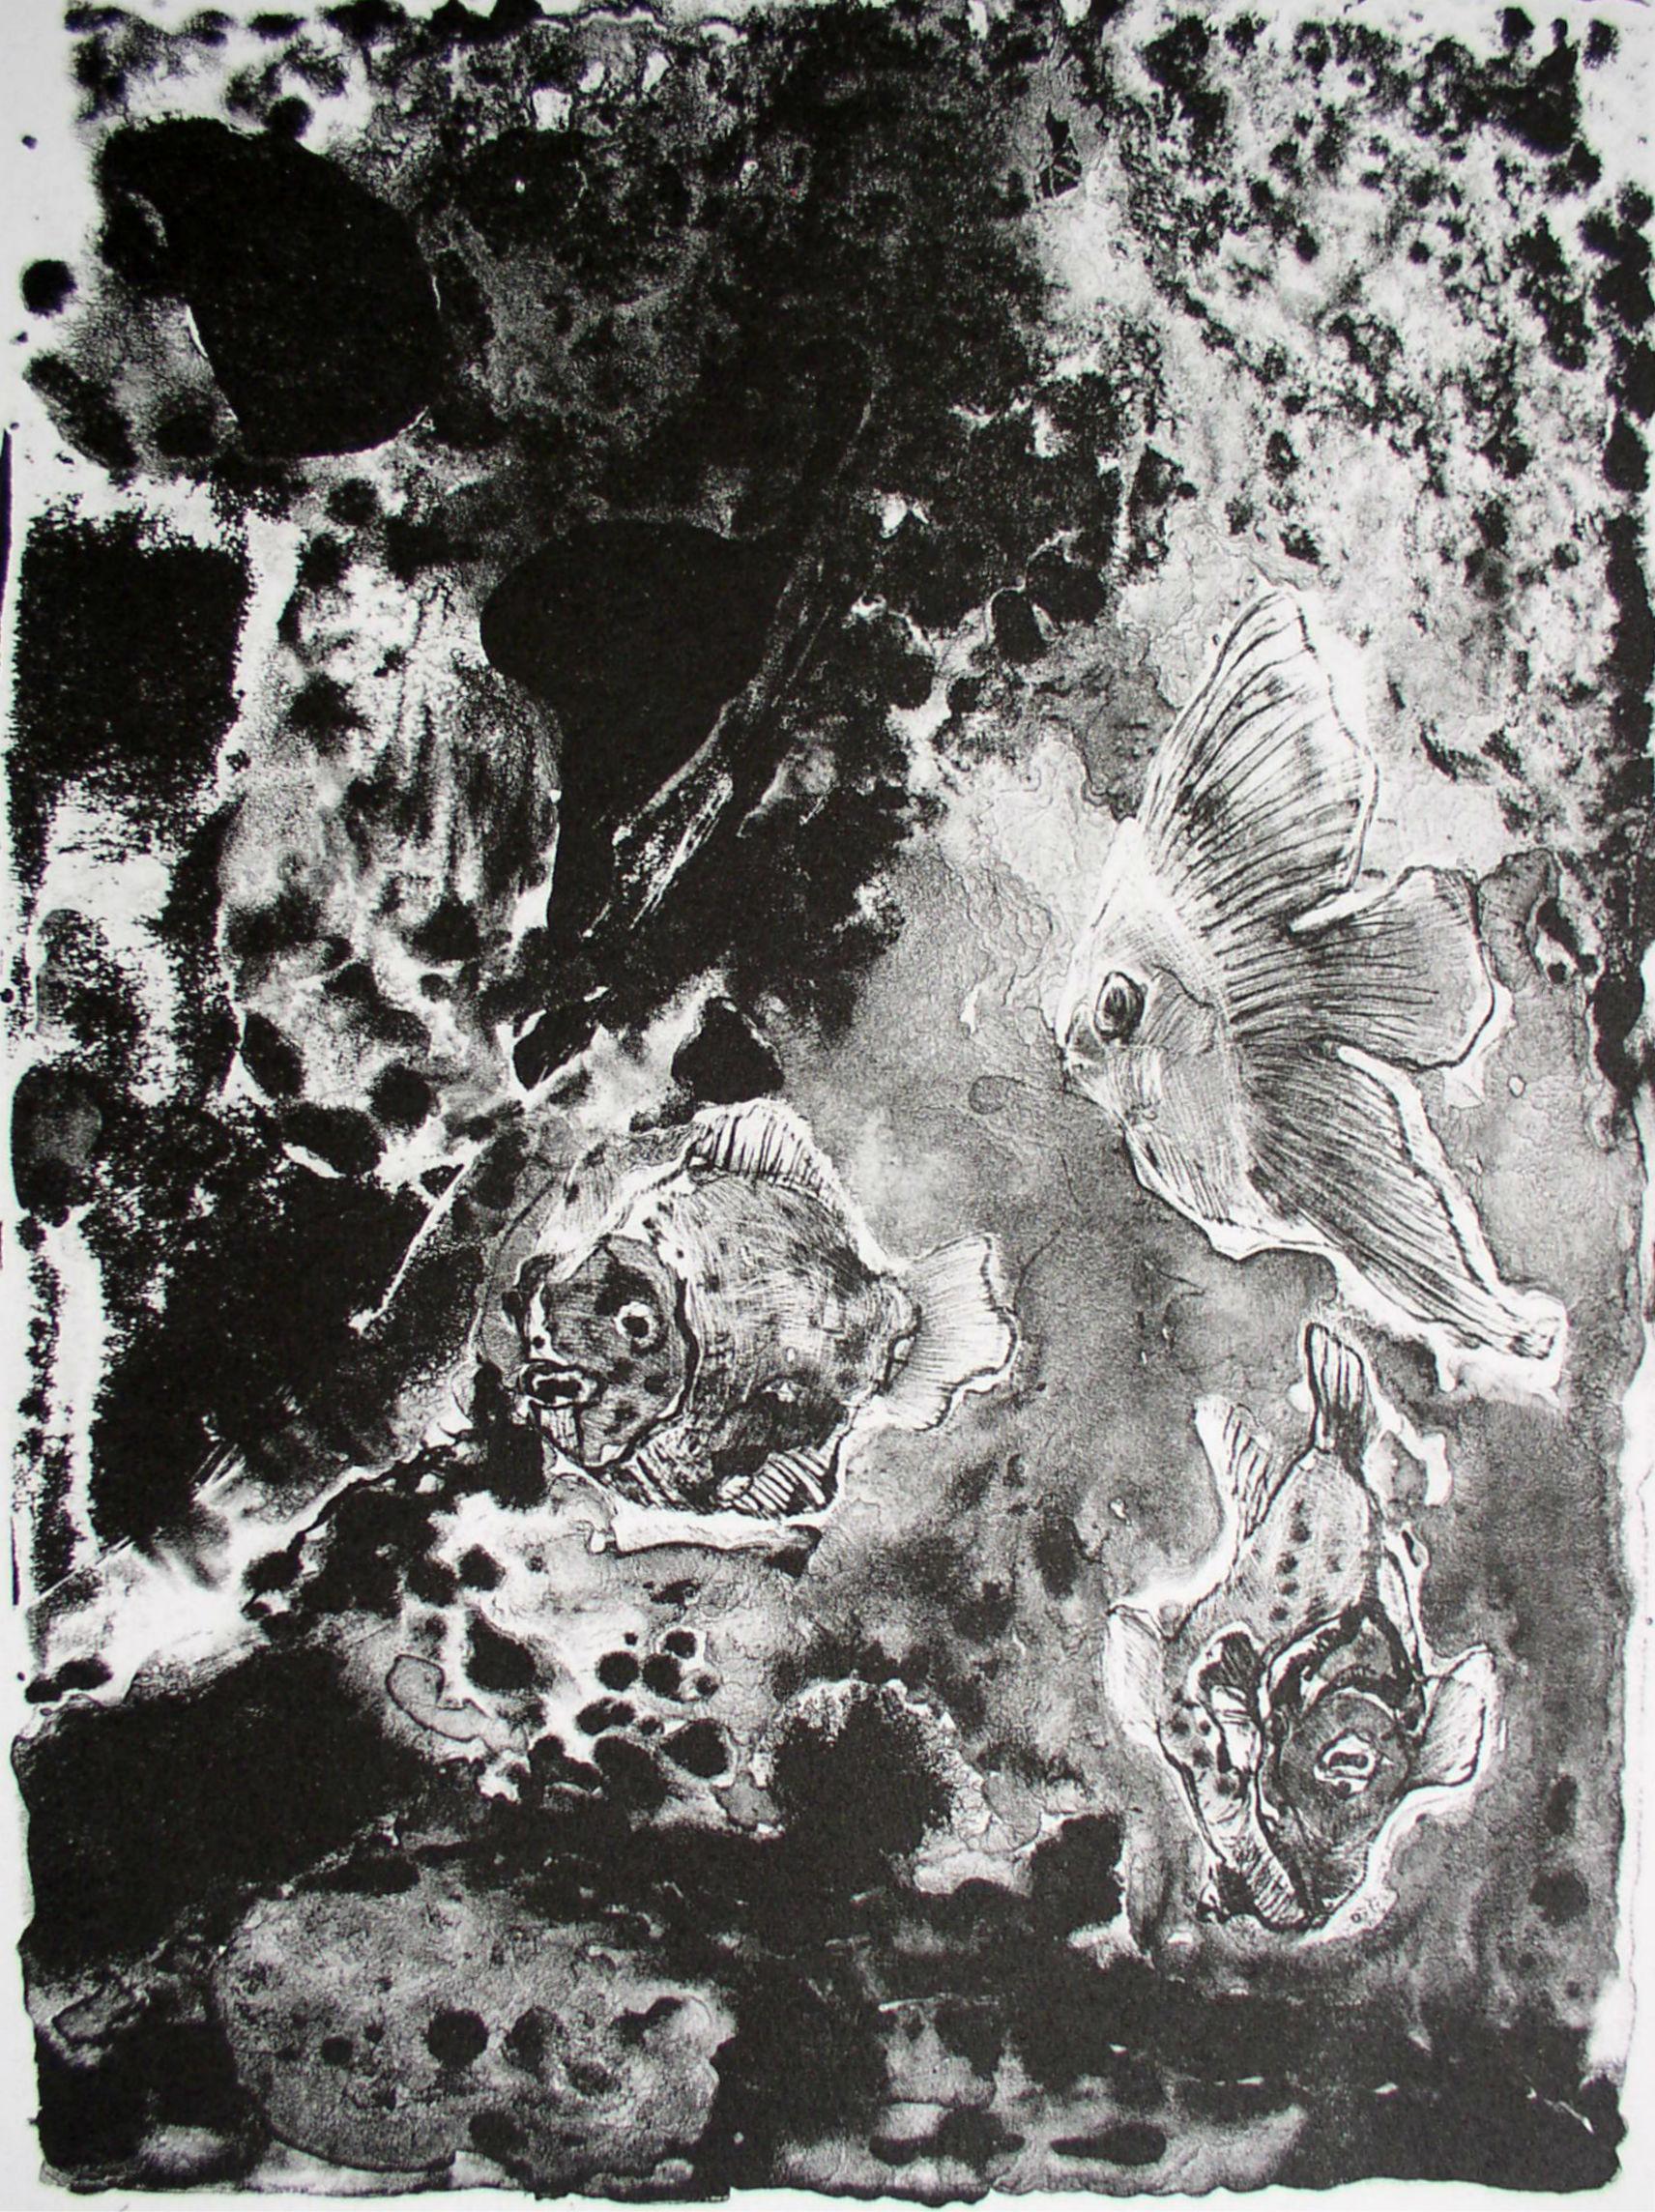 Krystyna Jaszke Animal Print - Fish - XXI century, Black and white litography print, Abstraction, Animals